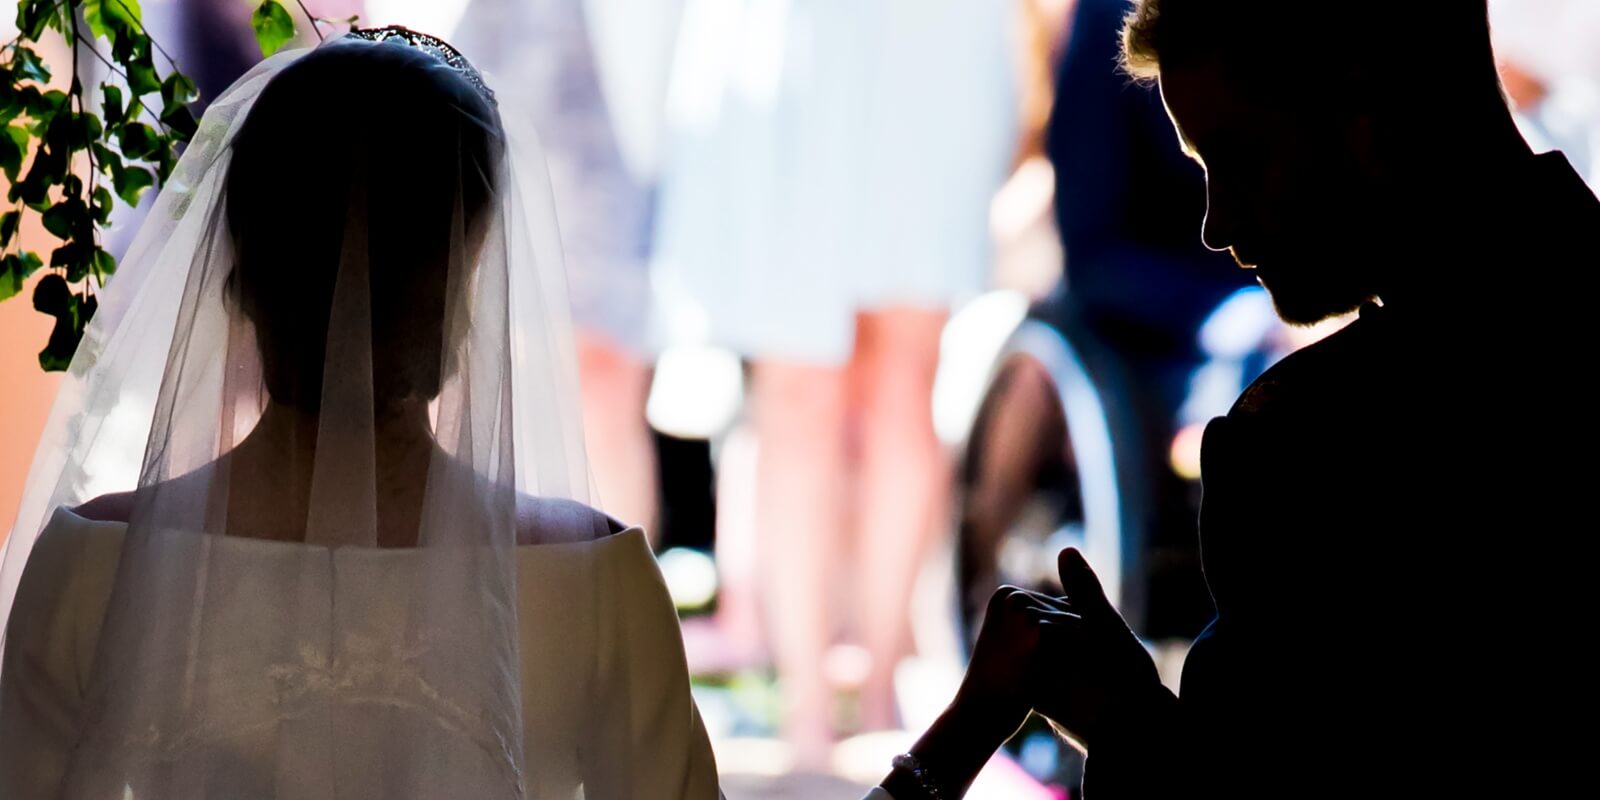 Meghan Markle and Prince Harry photographed from behind on their 2018 wedding day.